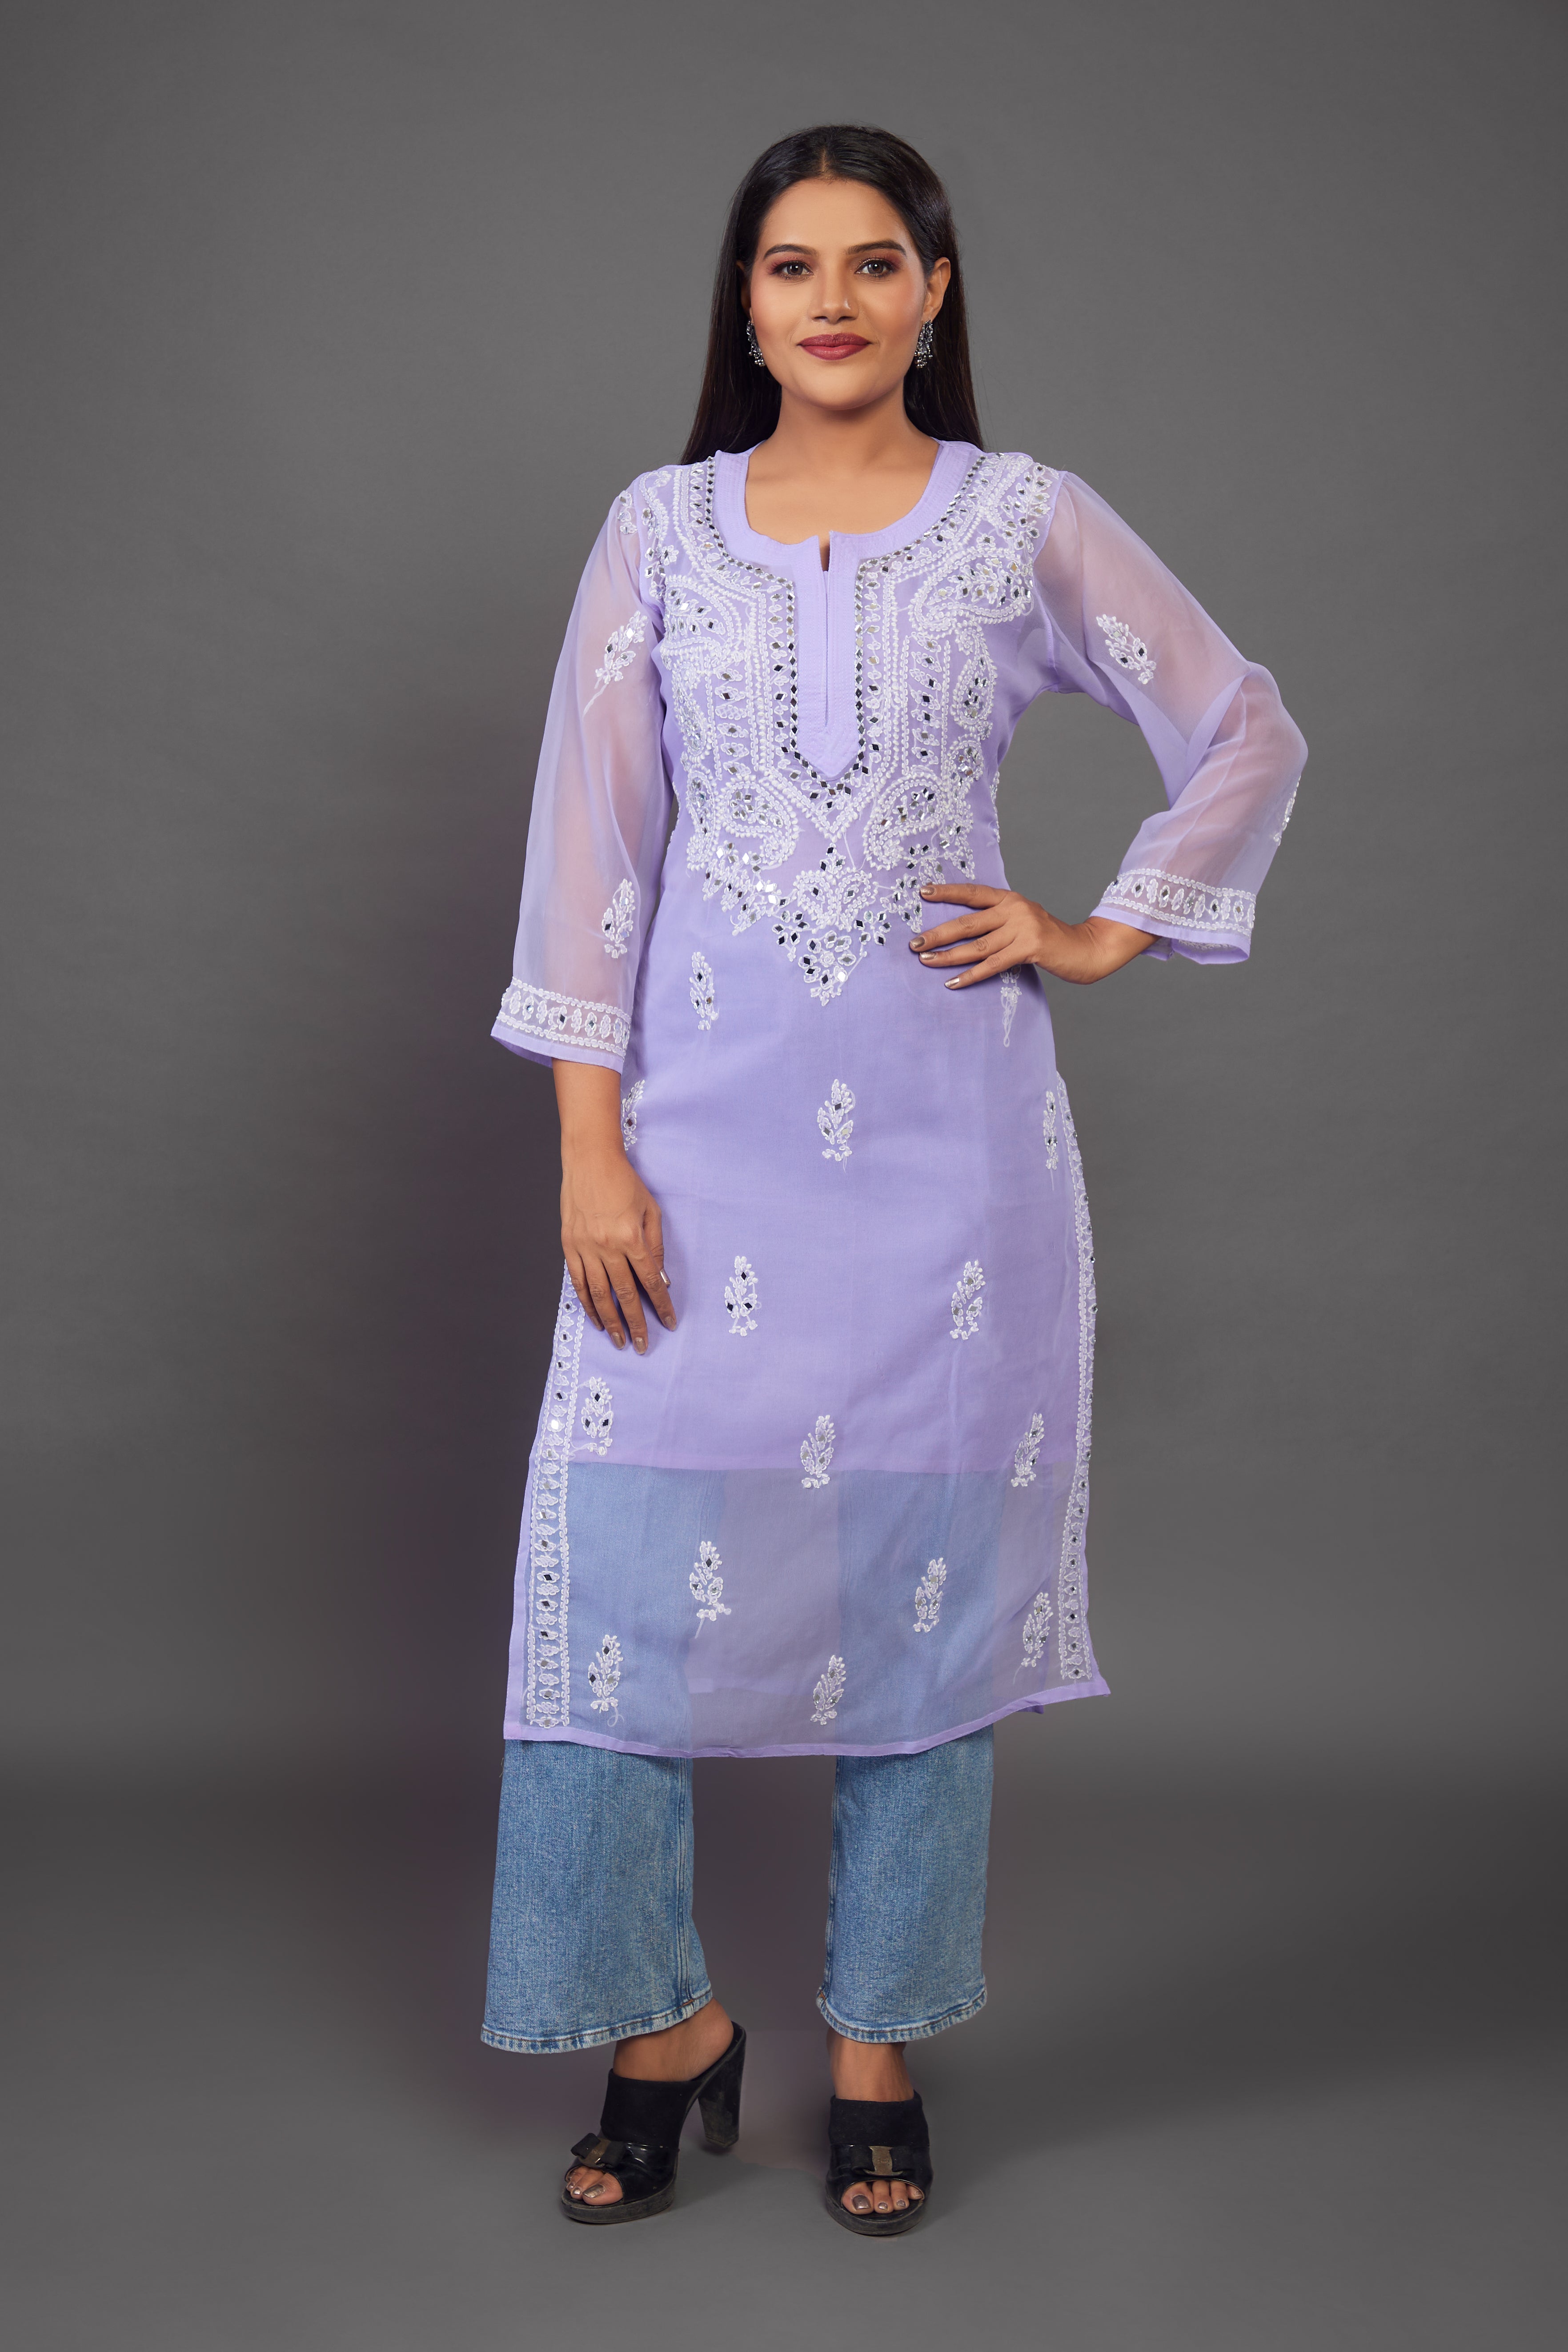 Indian Traditional Ethnic Party Daily Wear Lucknowi chikankari kurti with  Slip | eBay